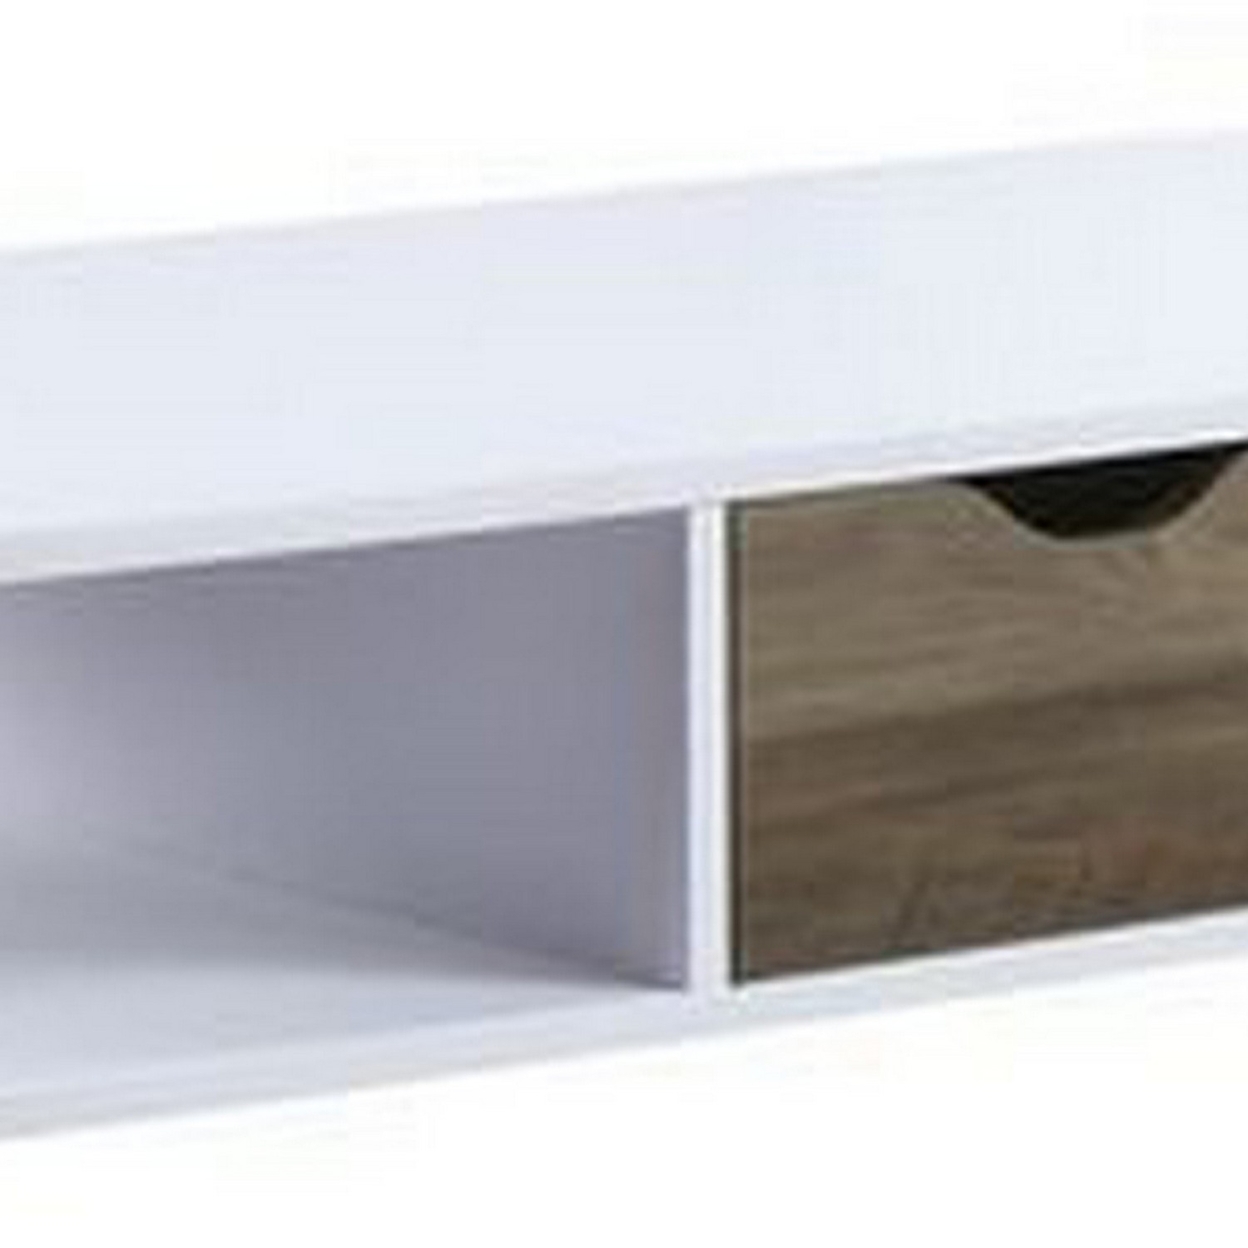 Coffee Table With Melamine Paper Veneer Top And 1 Drawer, White- Saltoro Sherpi